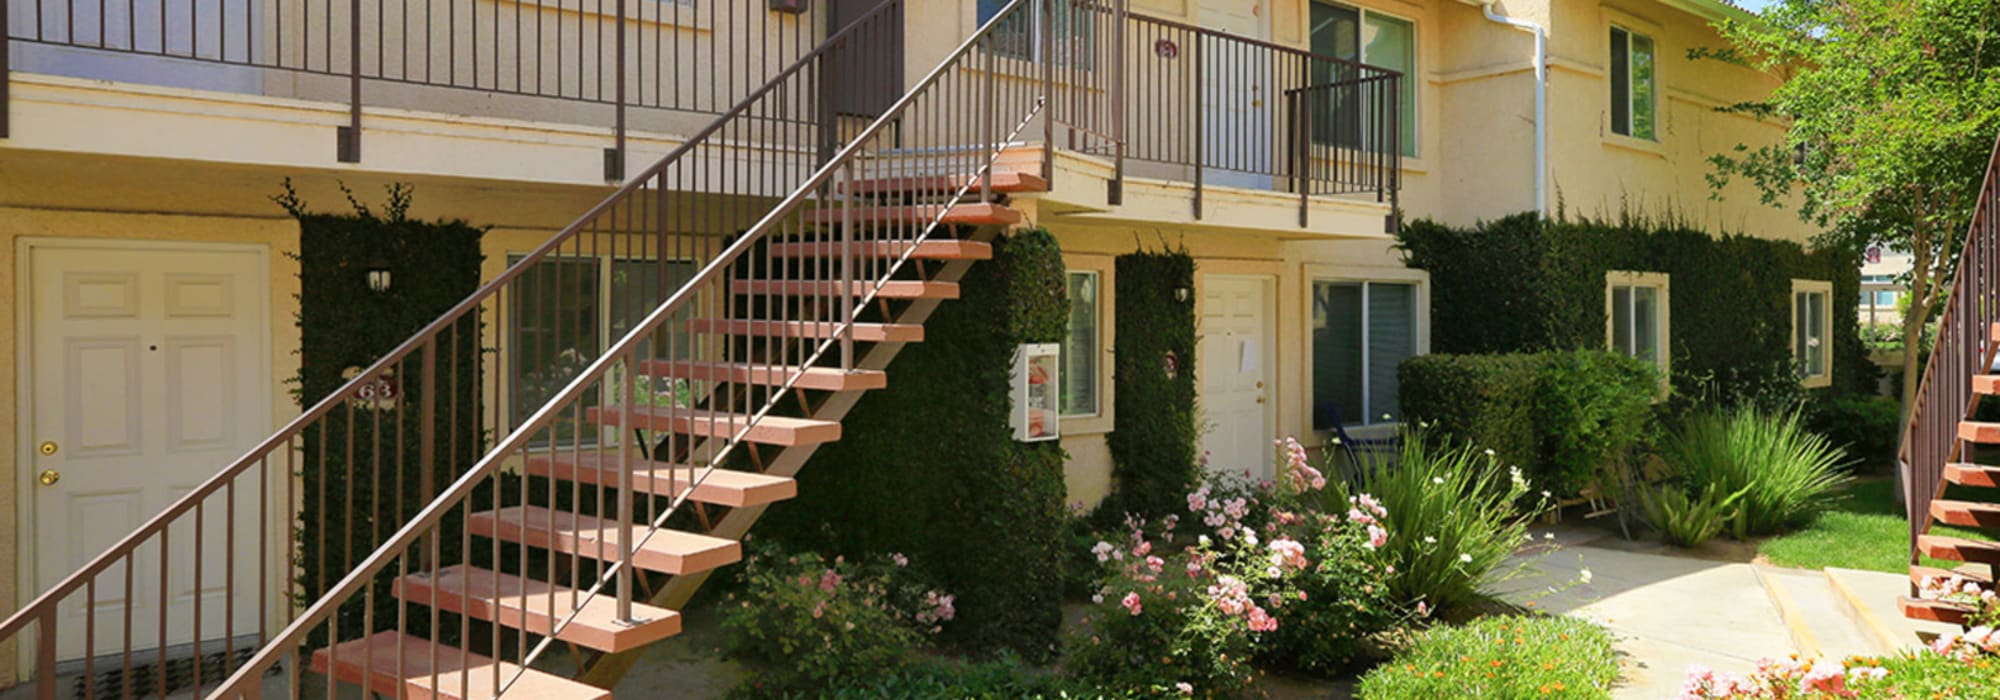 Entrances to the apartments at Park Sorrento in Bakersfield, California